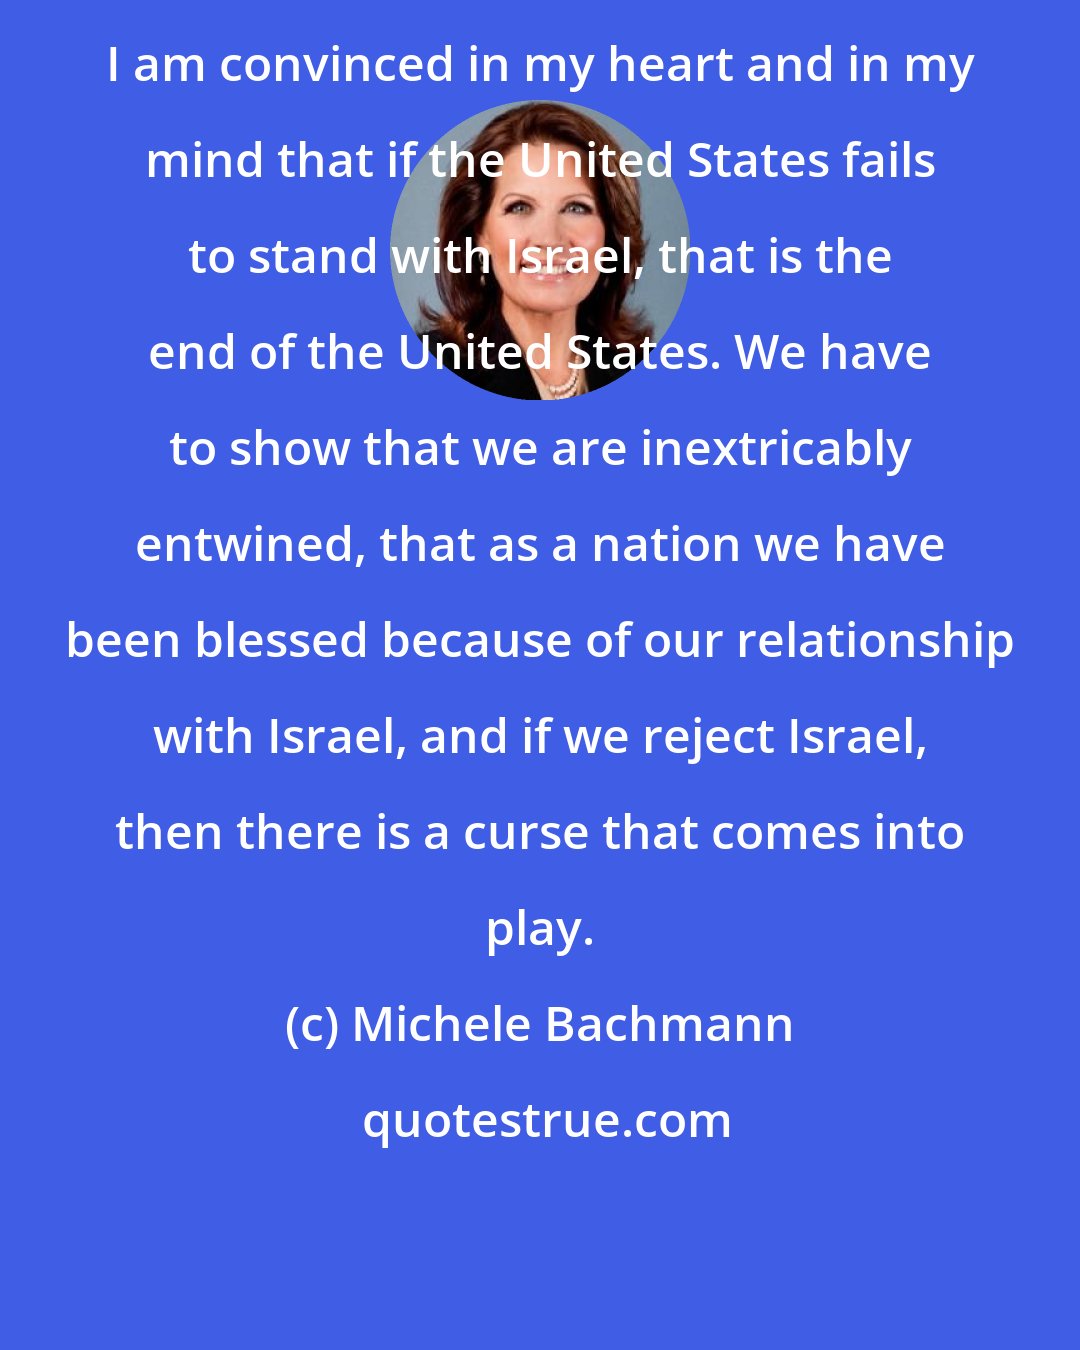 Michele Bachmann: I am convinced in my heart and in my mind that if the United States fails to stand with Israel, that is the end of the United States. We have to show that we are inextricably entwined, that as a nation we have been blessed because of our relationship with Israel, and if we reject Israel, then there is a curse that comes into play.